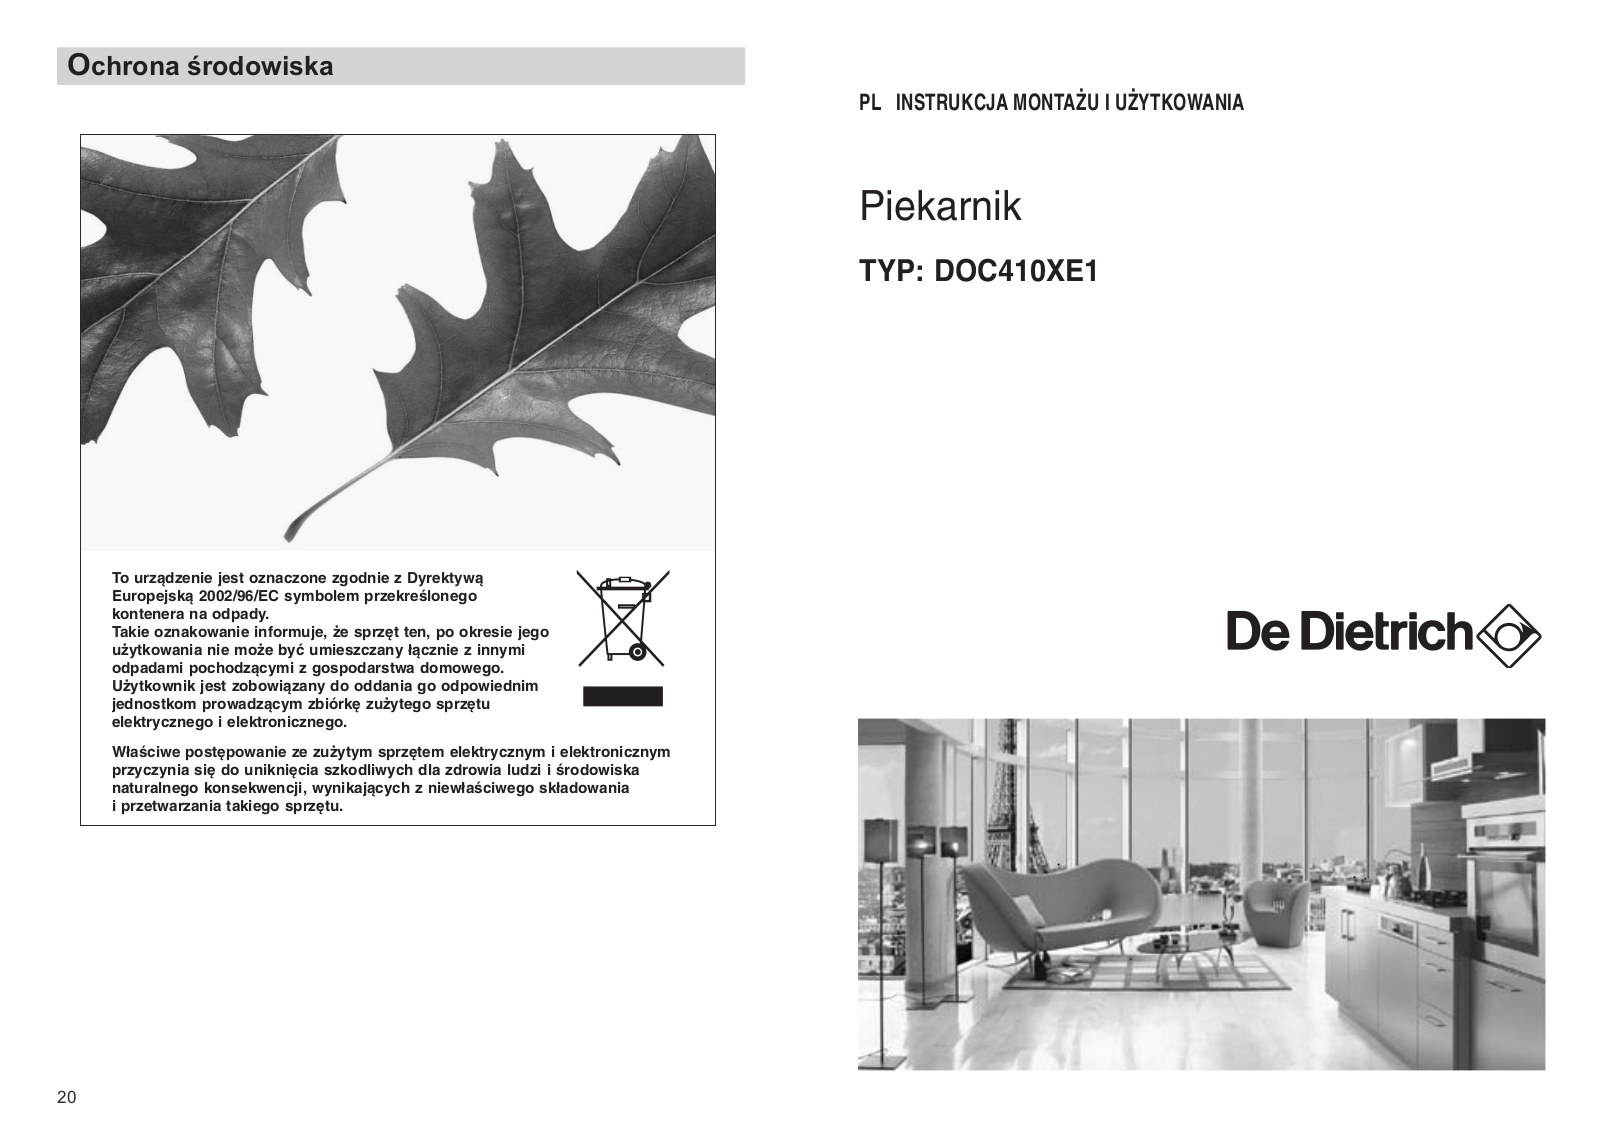 De dietrich DOC410XE1 User and installation Manual